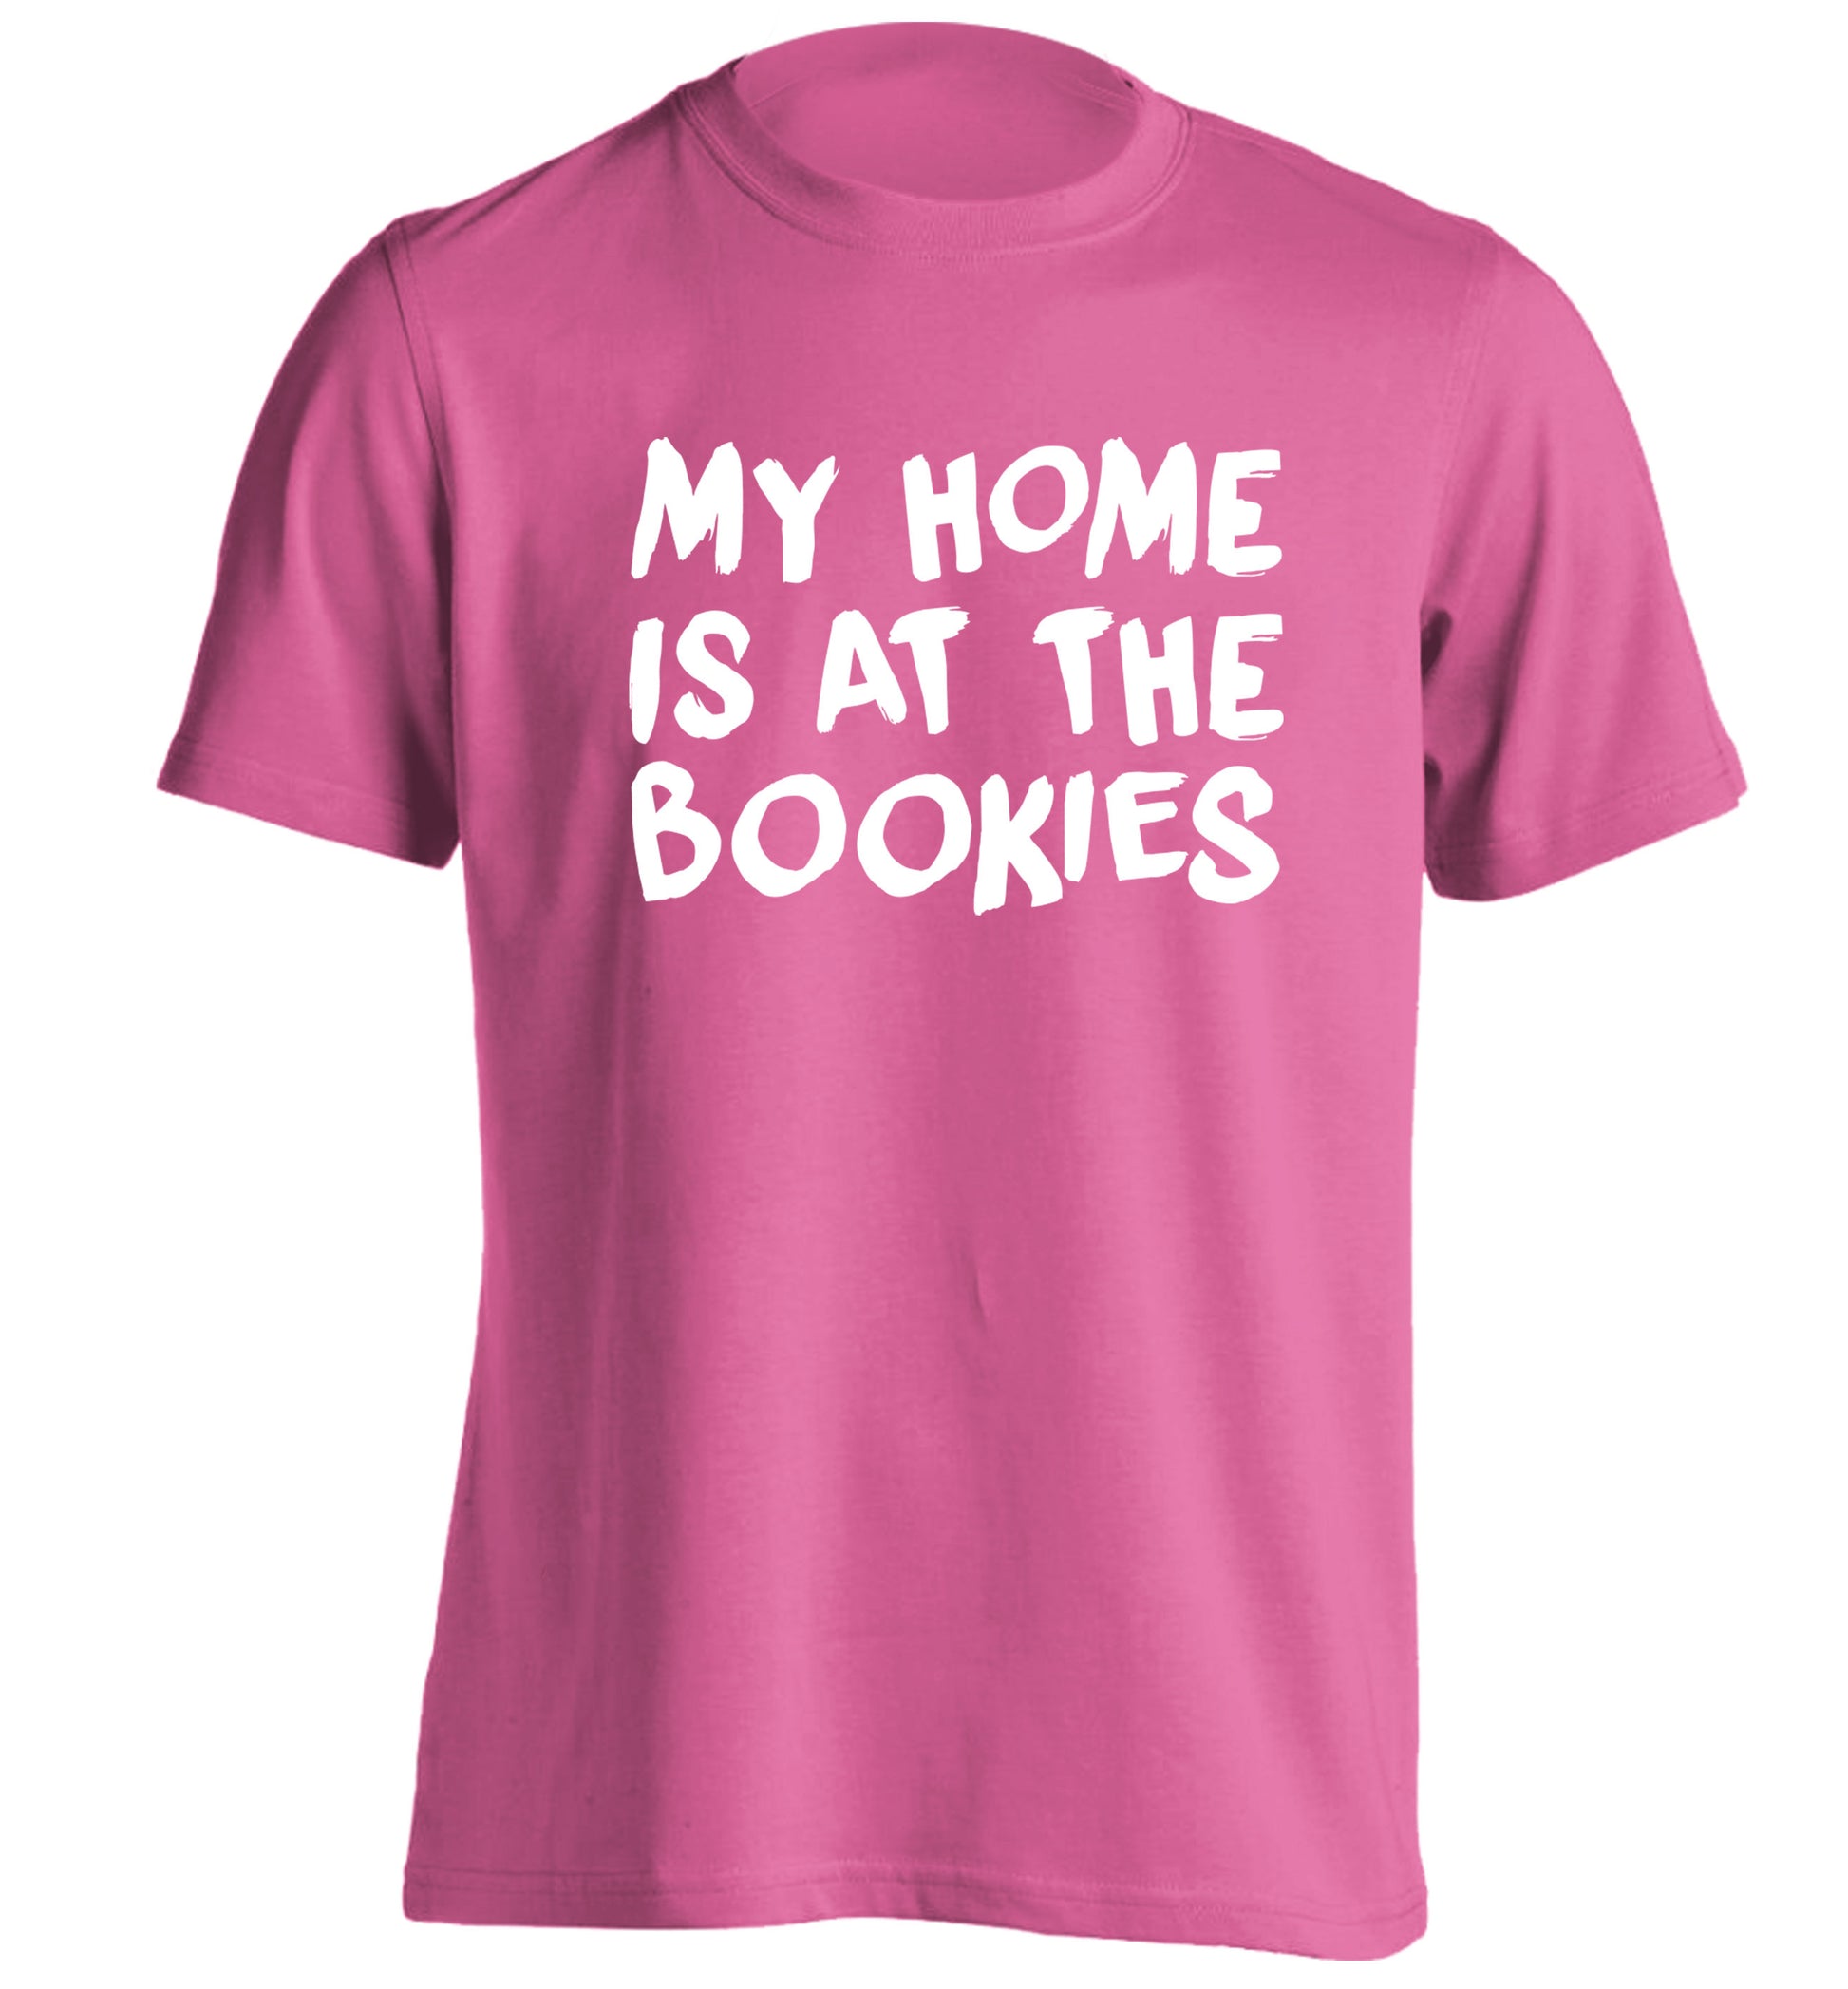 My home is at the bookies adults unisex pink Tshirt 2XL